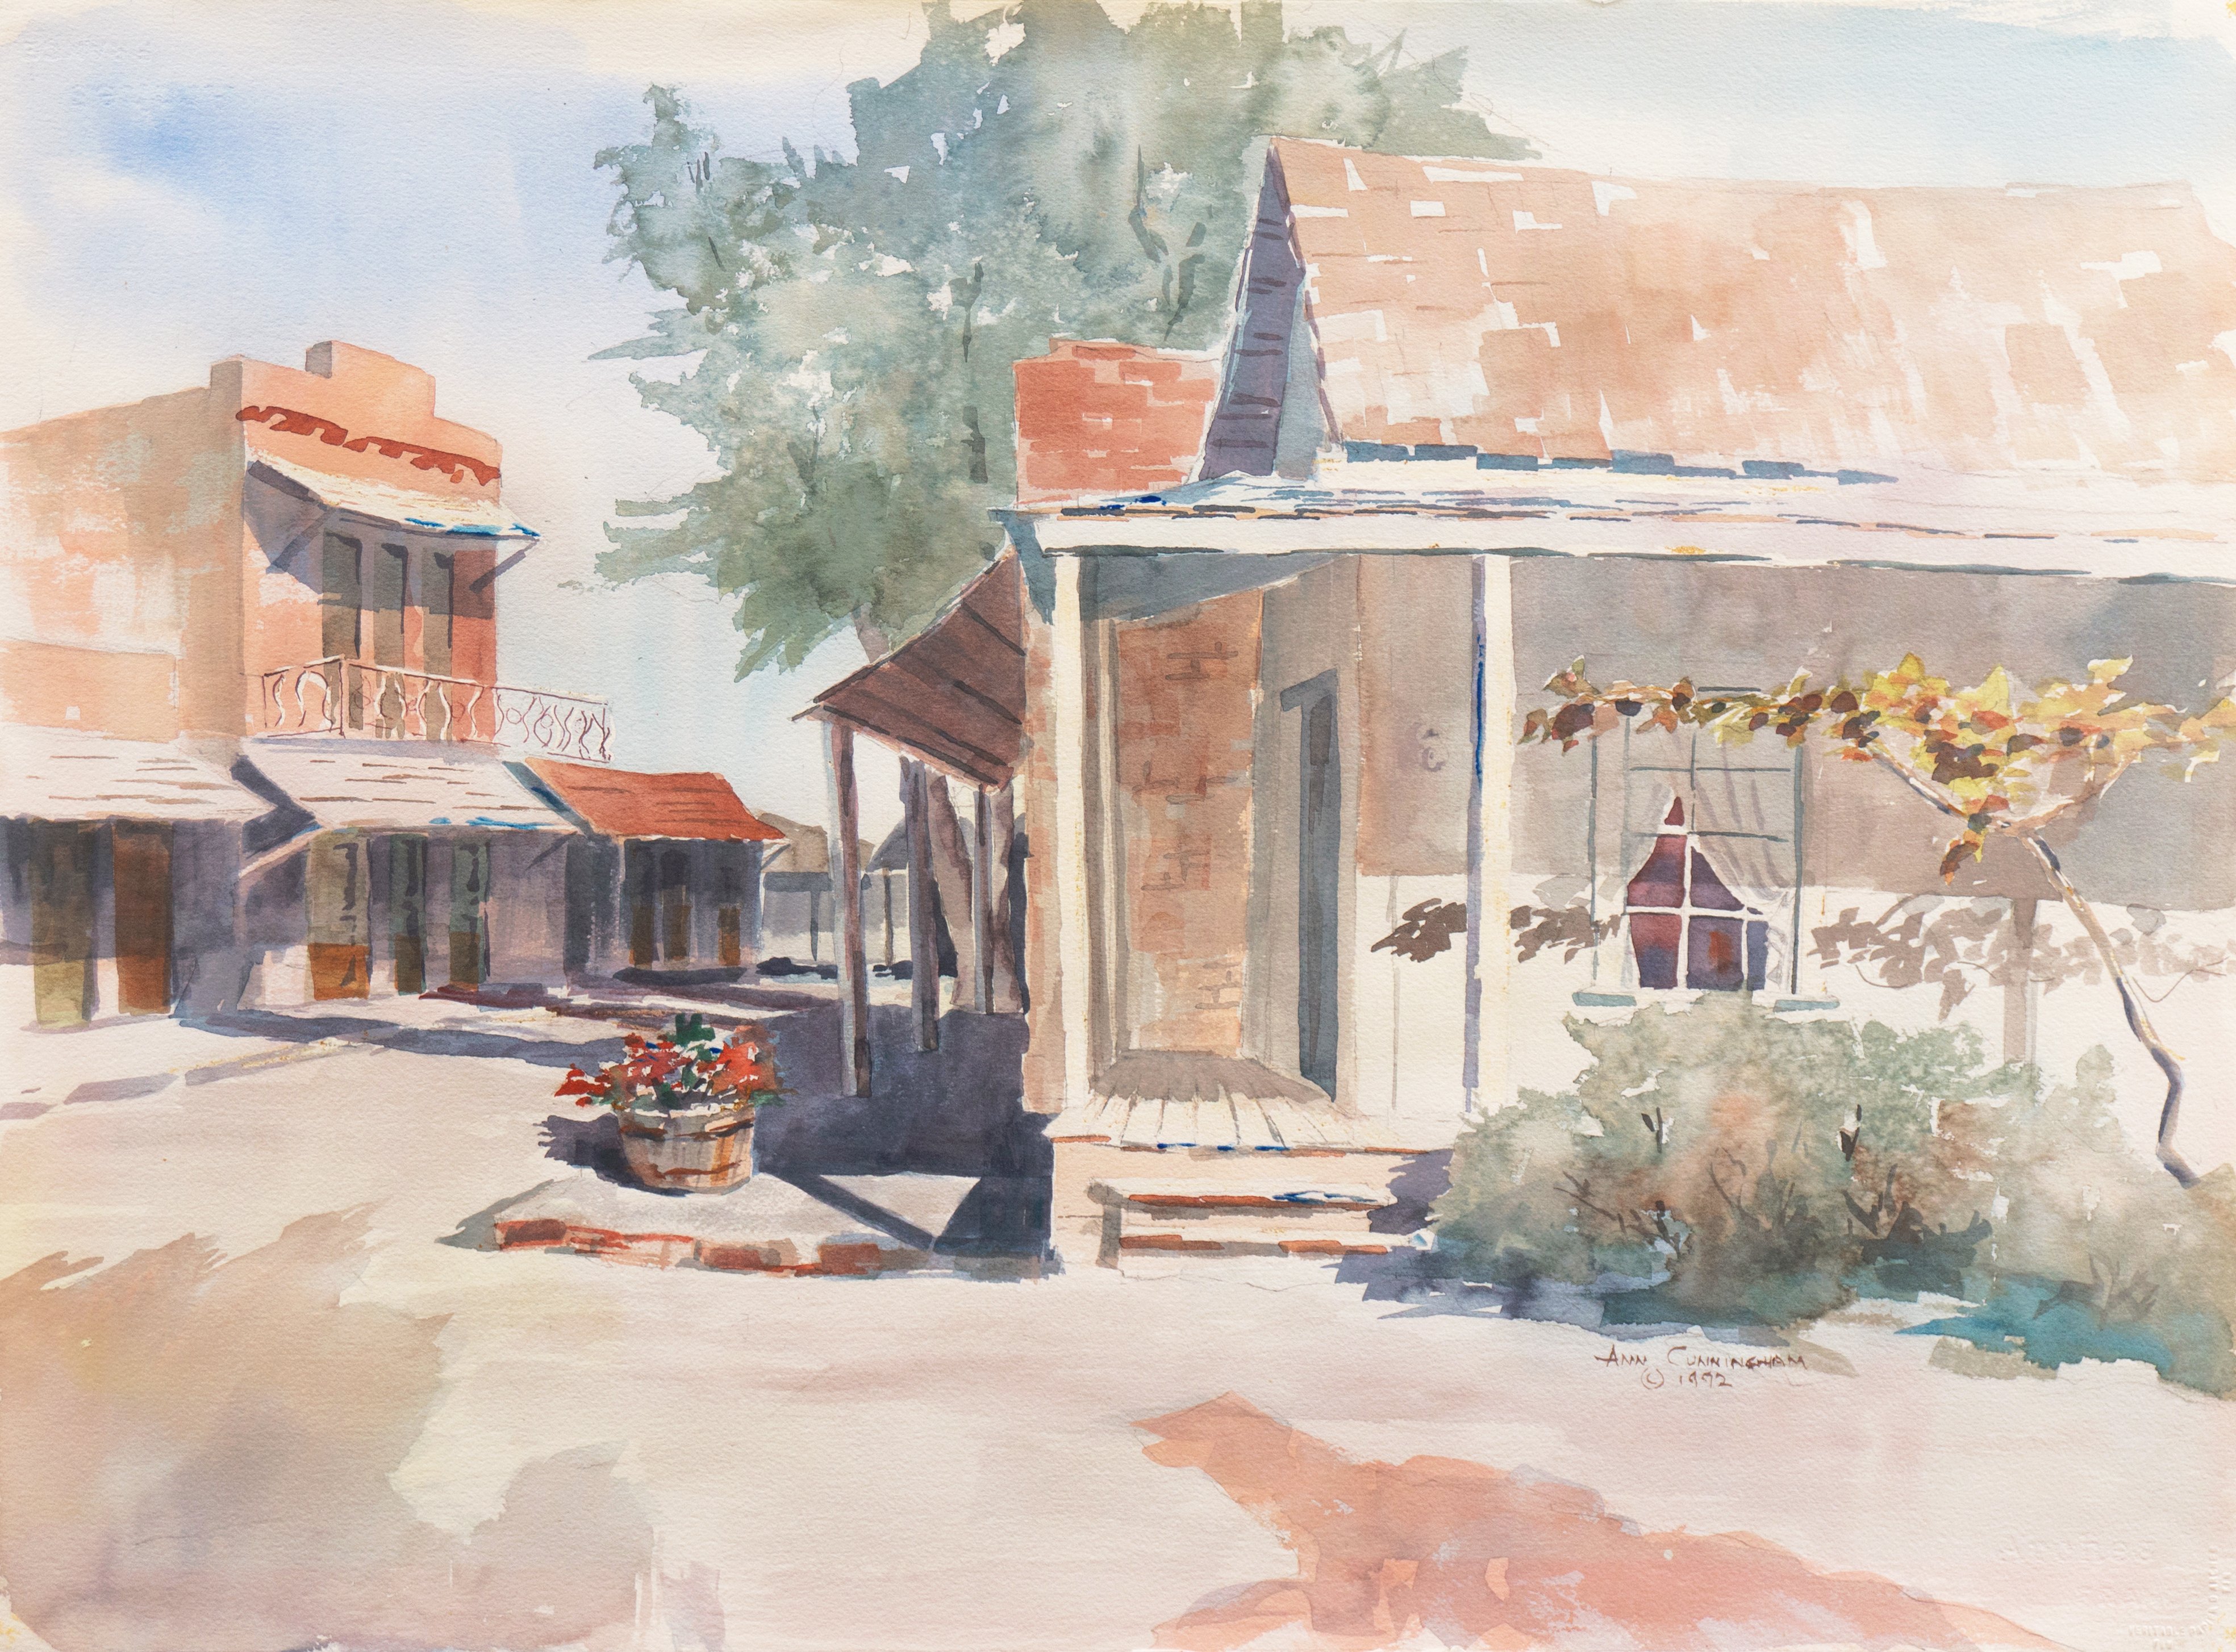 Old Western Town by Ann Cunningham, 1992~P77628393